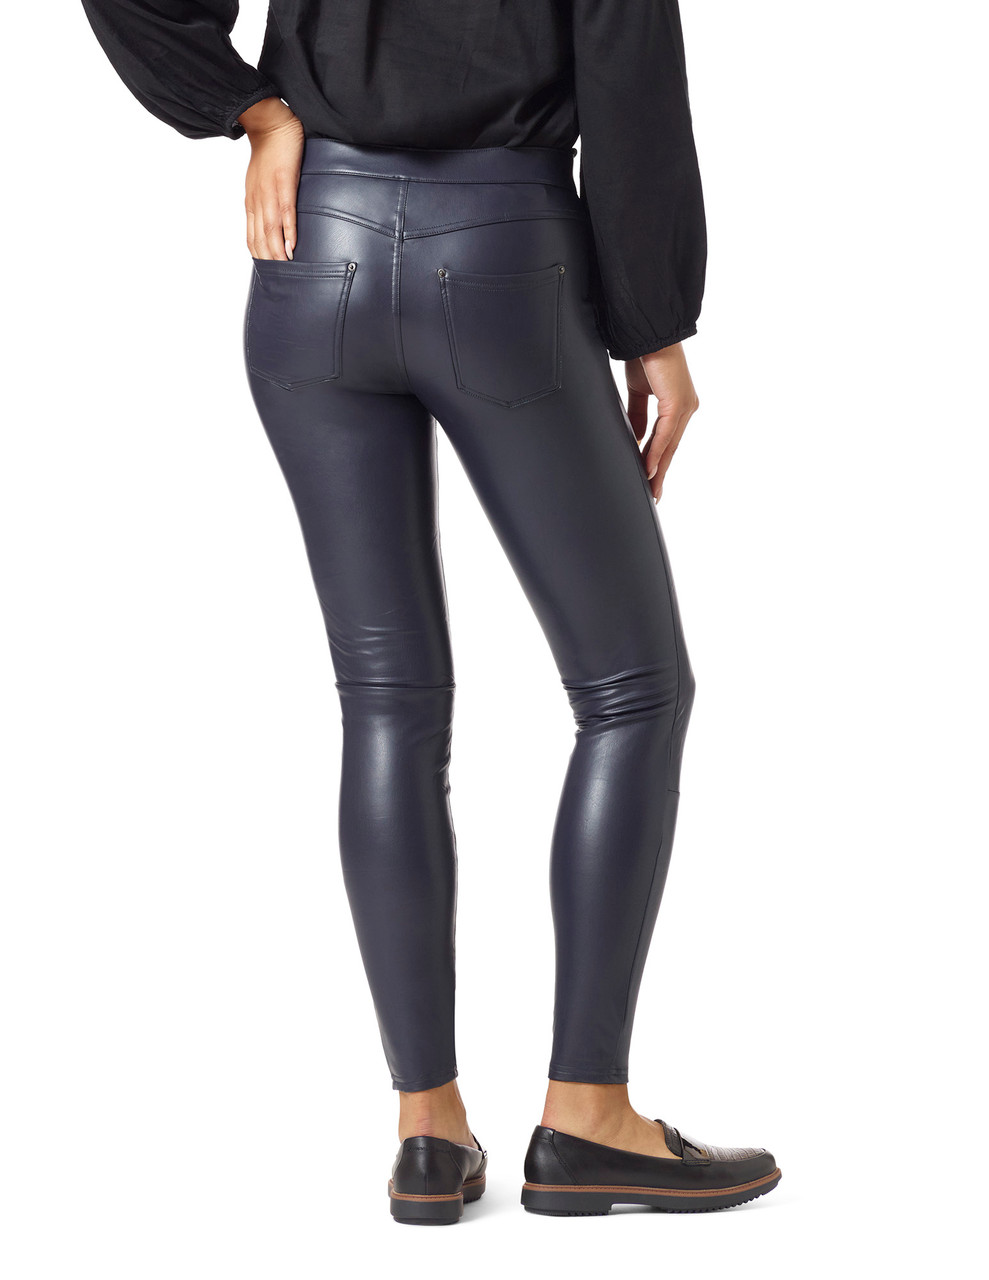 Black Faux Leather Moto Leggings Jeggings for Women Sexy Plus Size Yoga  Pleather Pants Tights